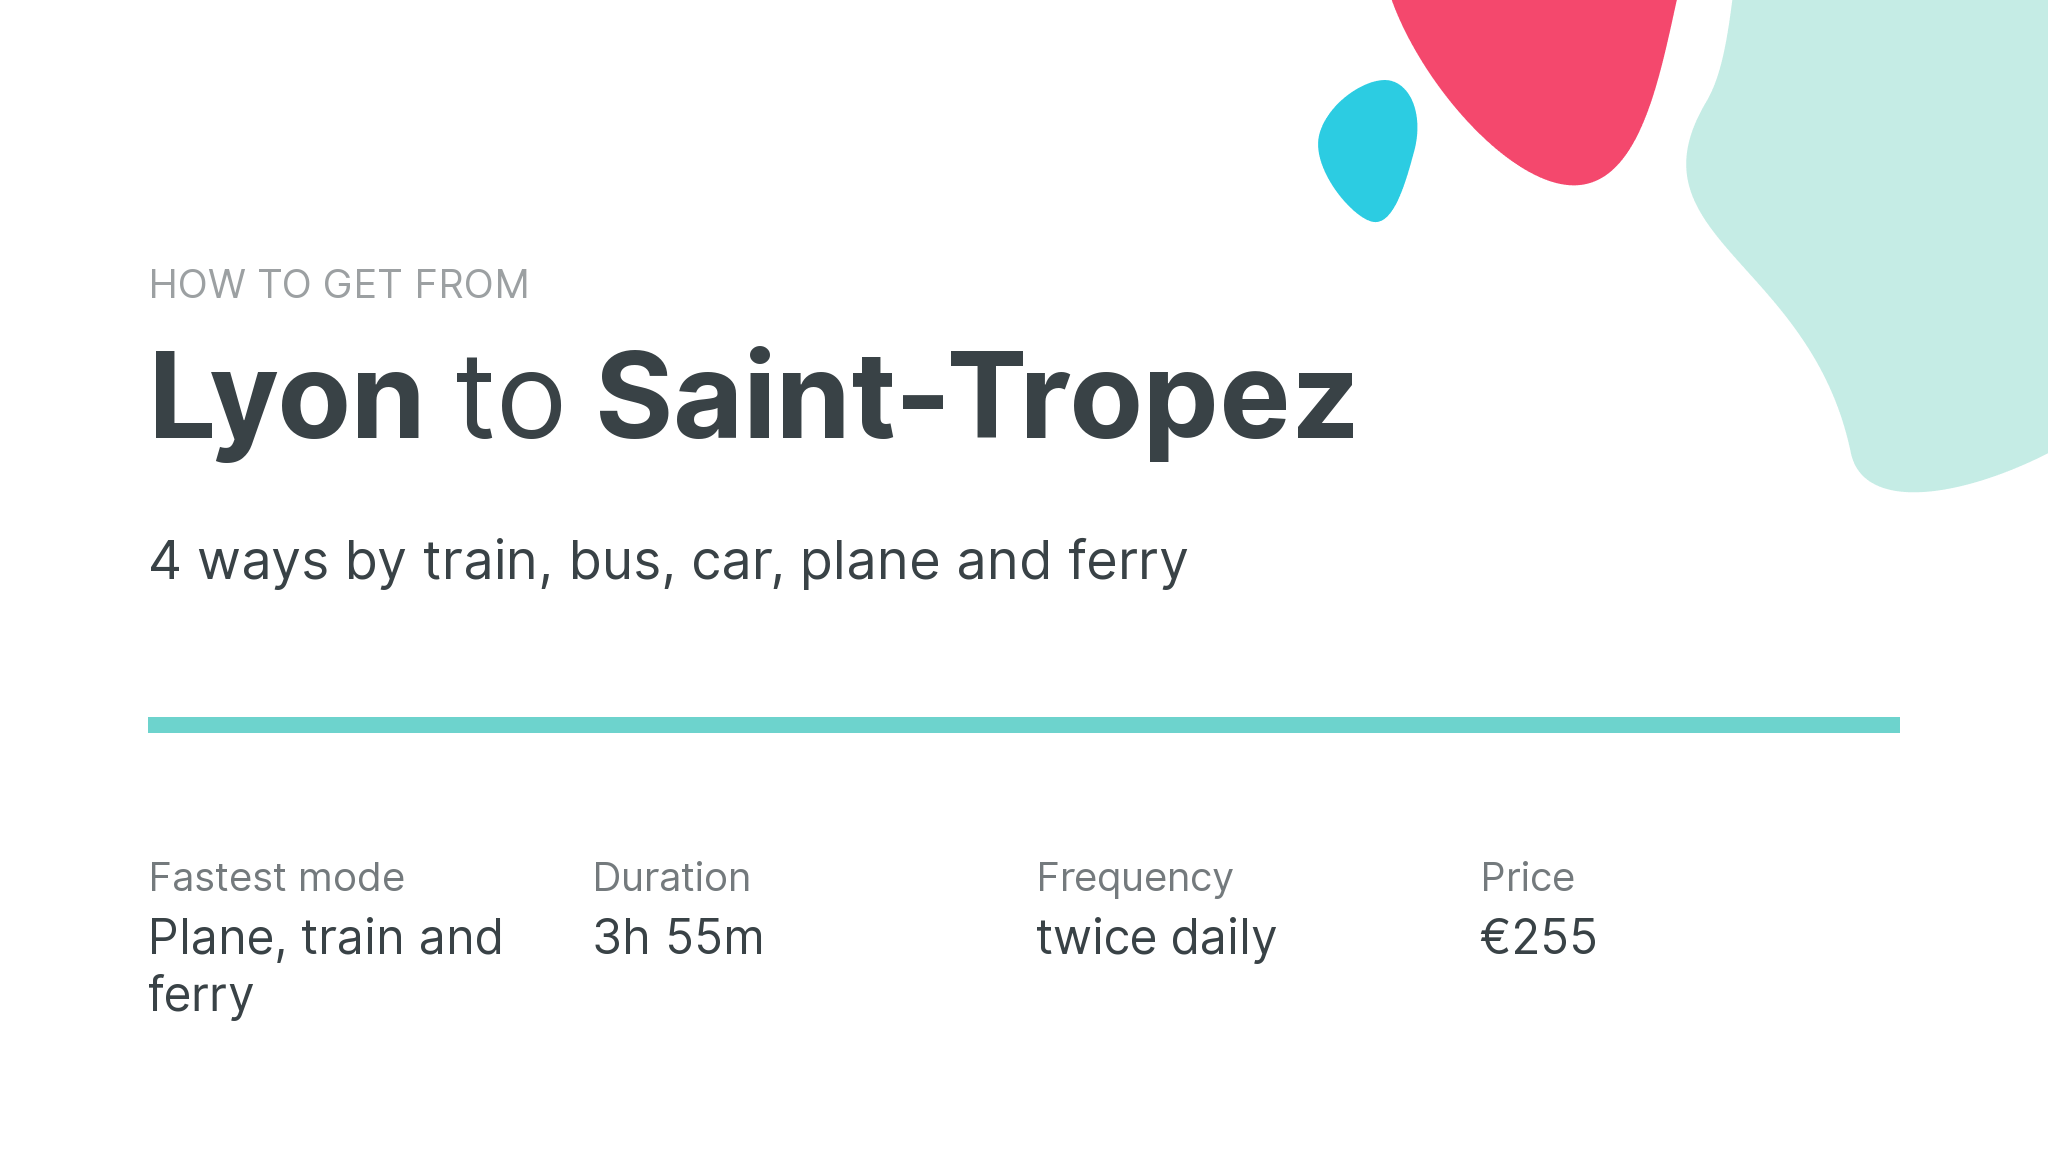 How do I get from Lyon to Saint-Tropez